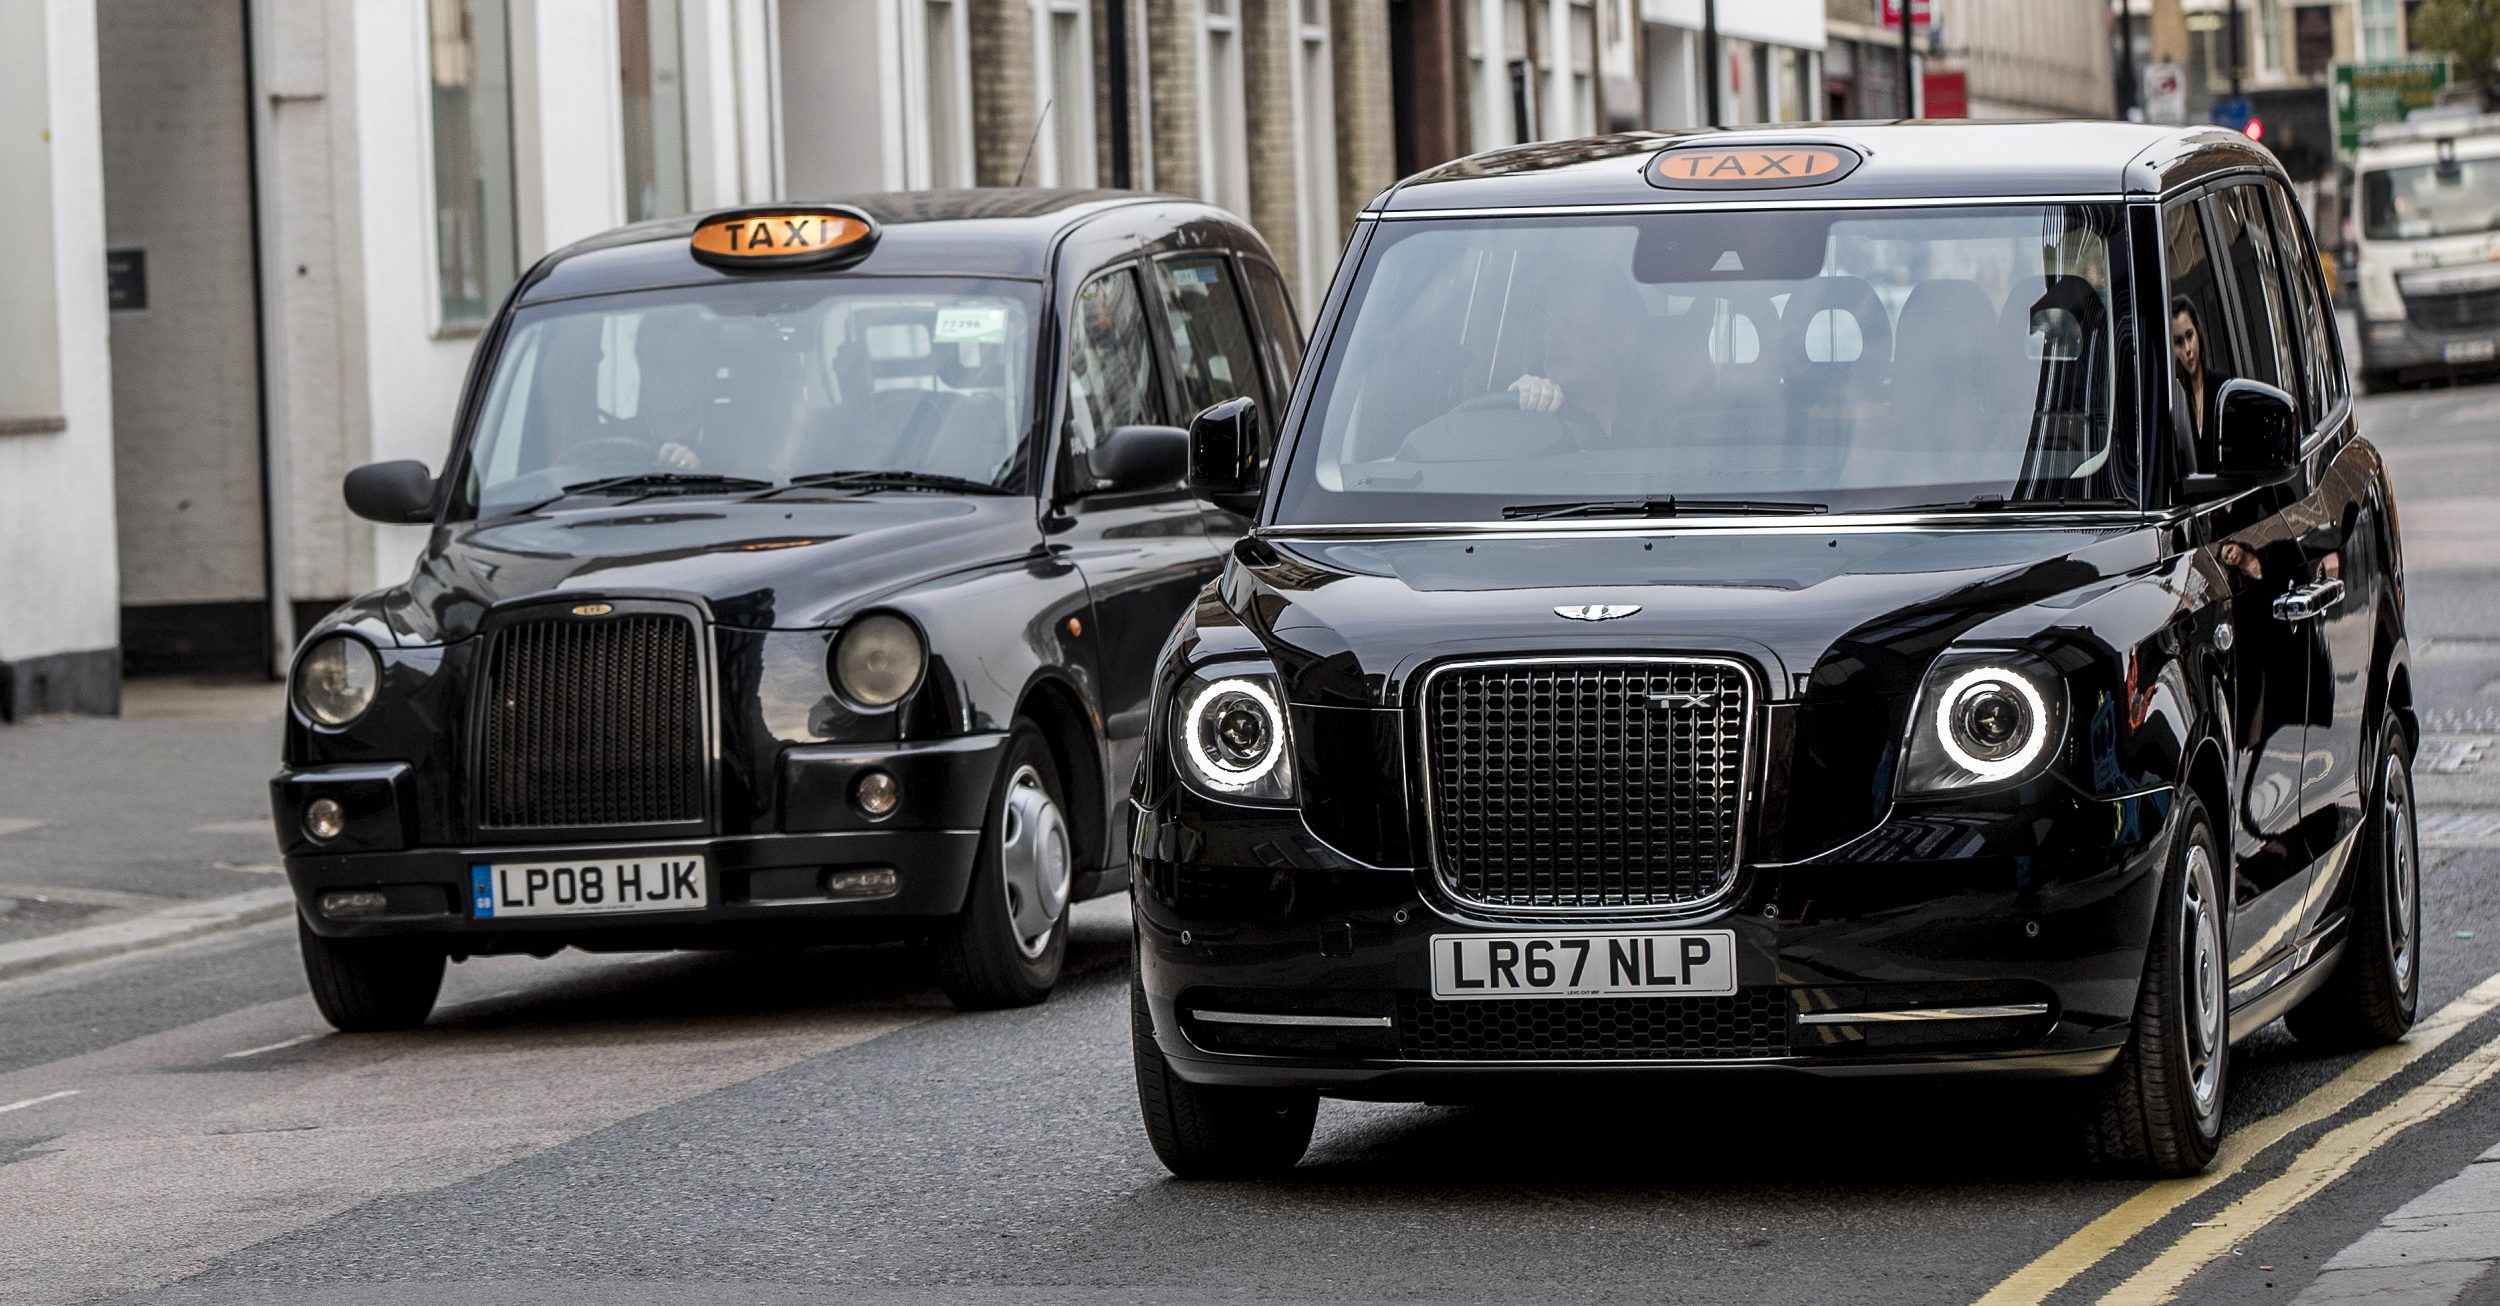 London puts new hybrid electric black cabs on roads ahead of larger rollout